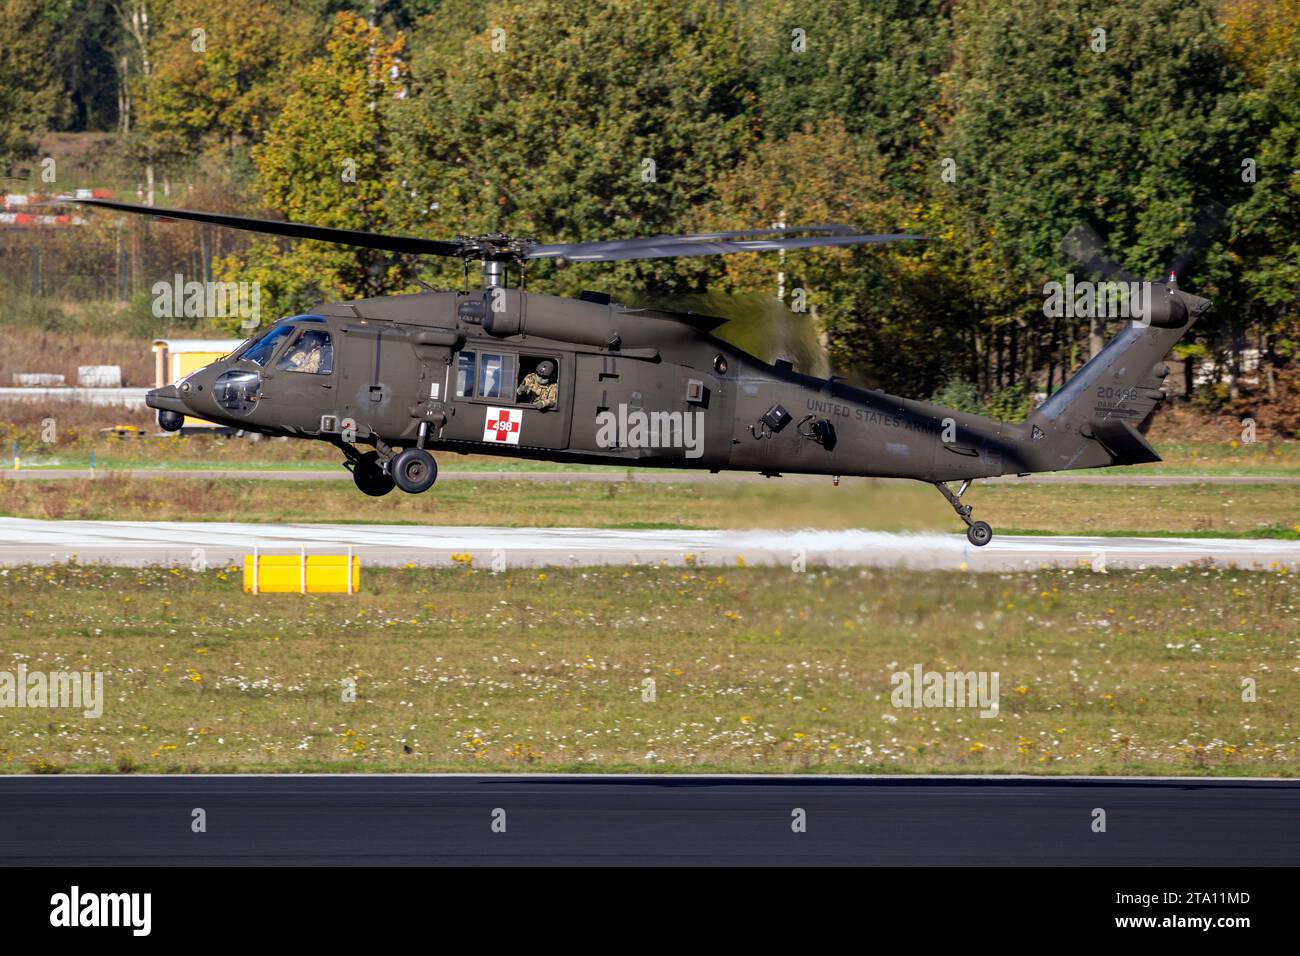 US Army Sikorsky HH-60M Blackhawk medevac helicopter in flight. The Netherlands - October 27, 2017 Stock Photo